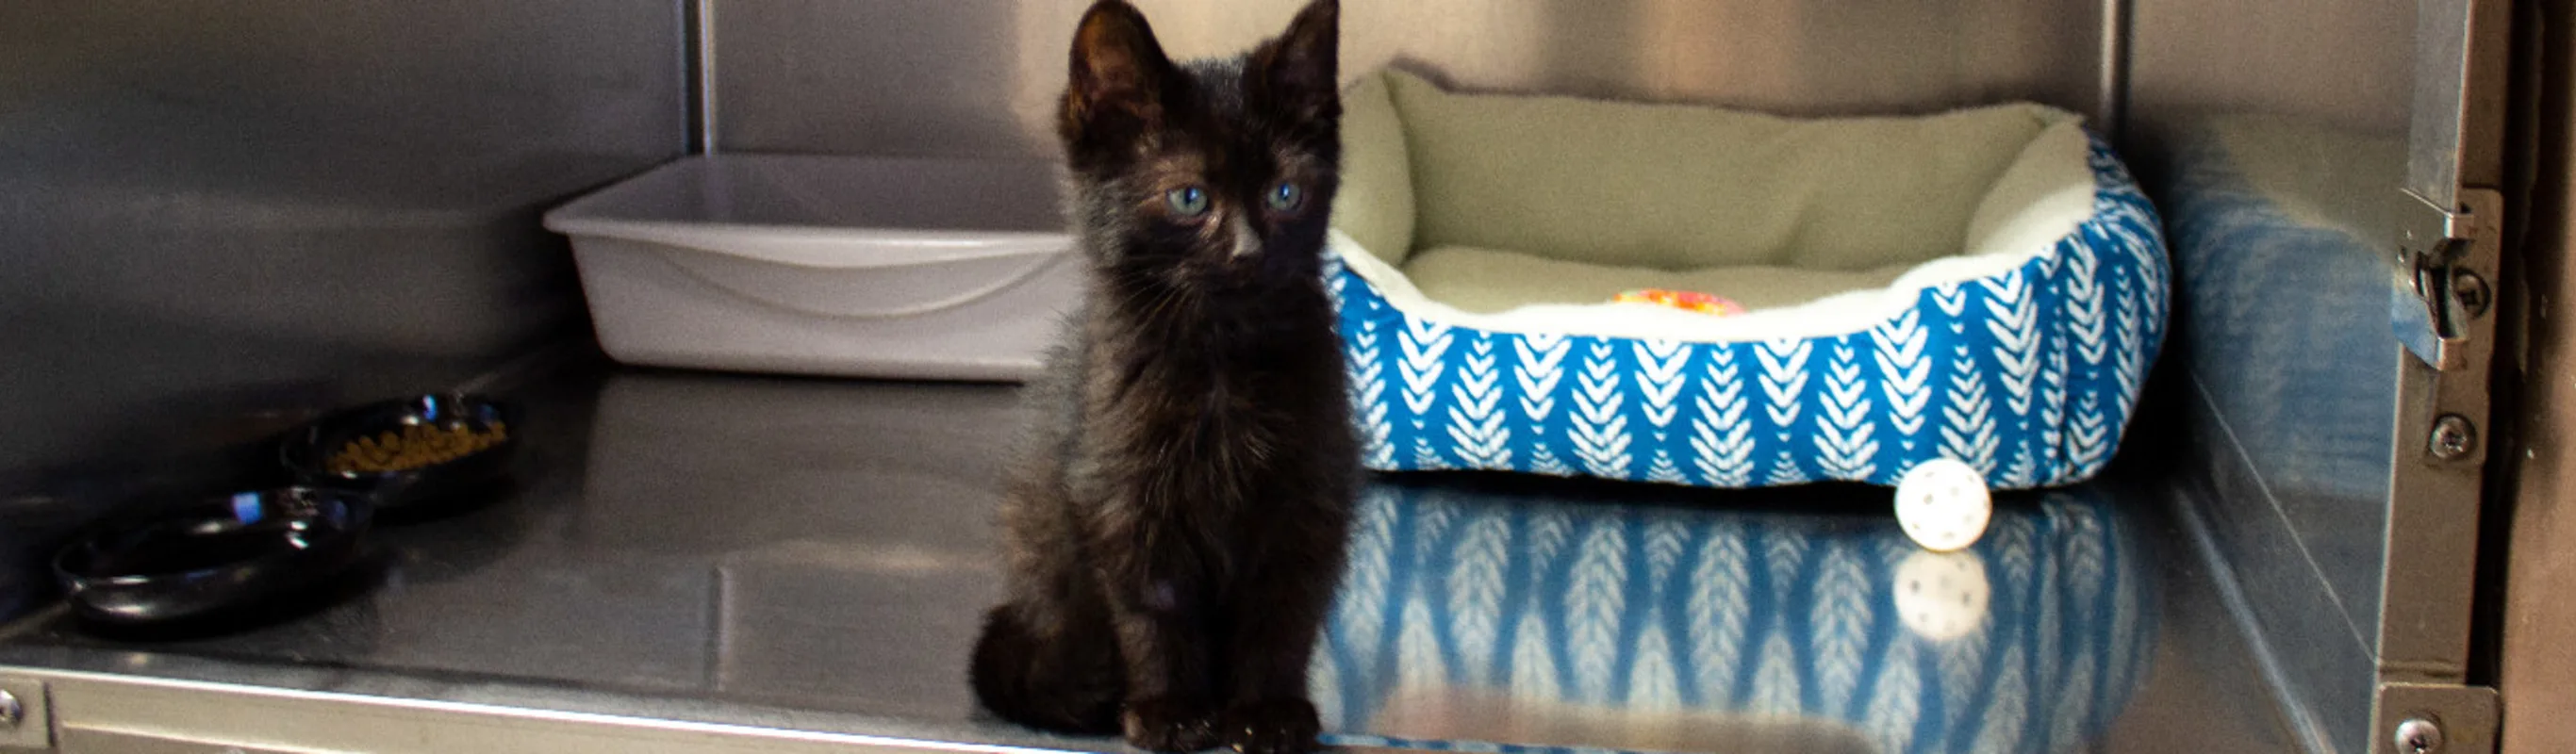 Black kitten with blue eyes sitting in kennel with supplies